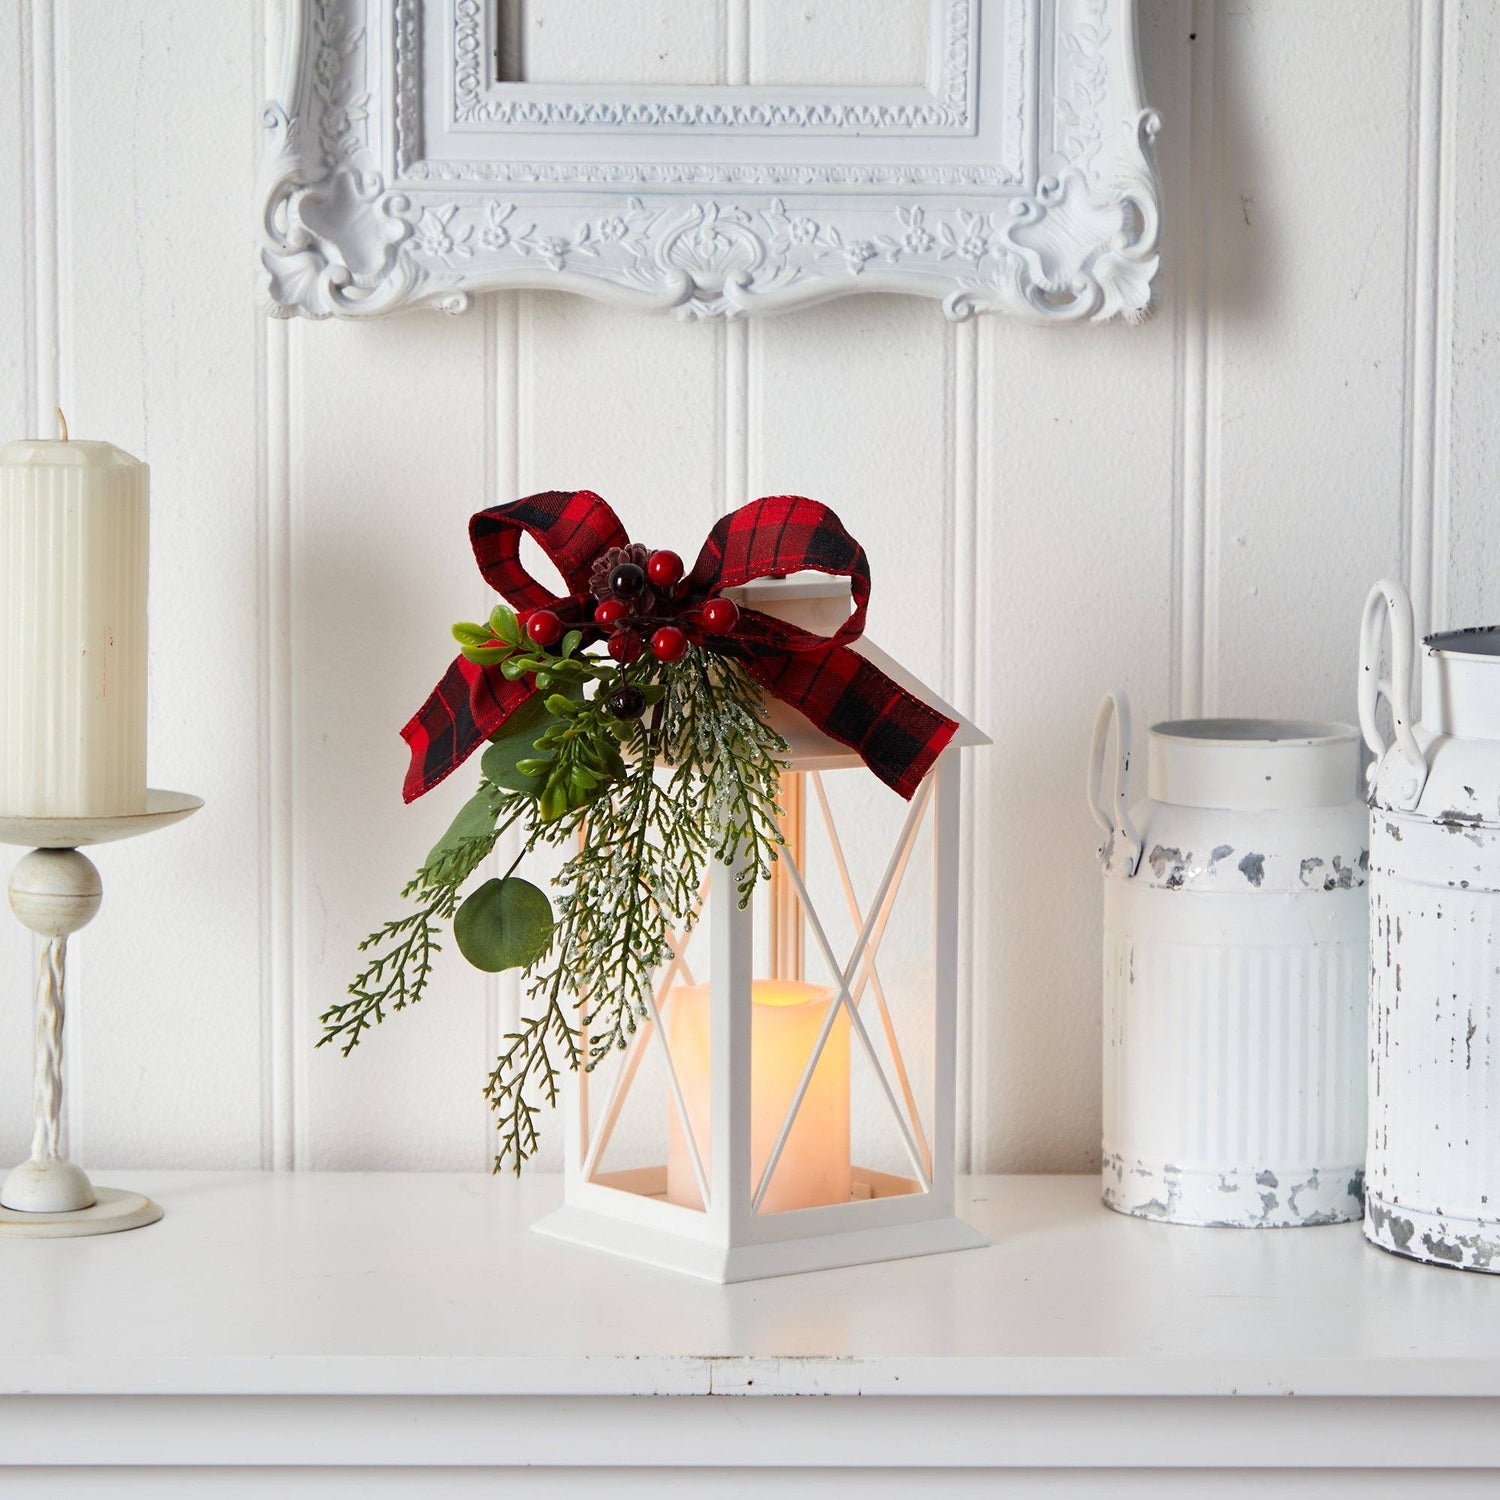 12" Holiday White Lantern With Berries, Pine and Plaid Bow Christmas Table Arrangement"